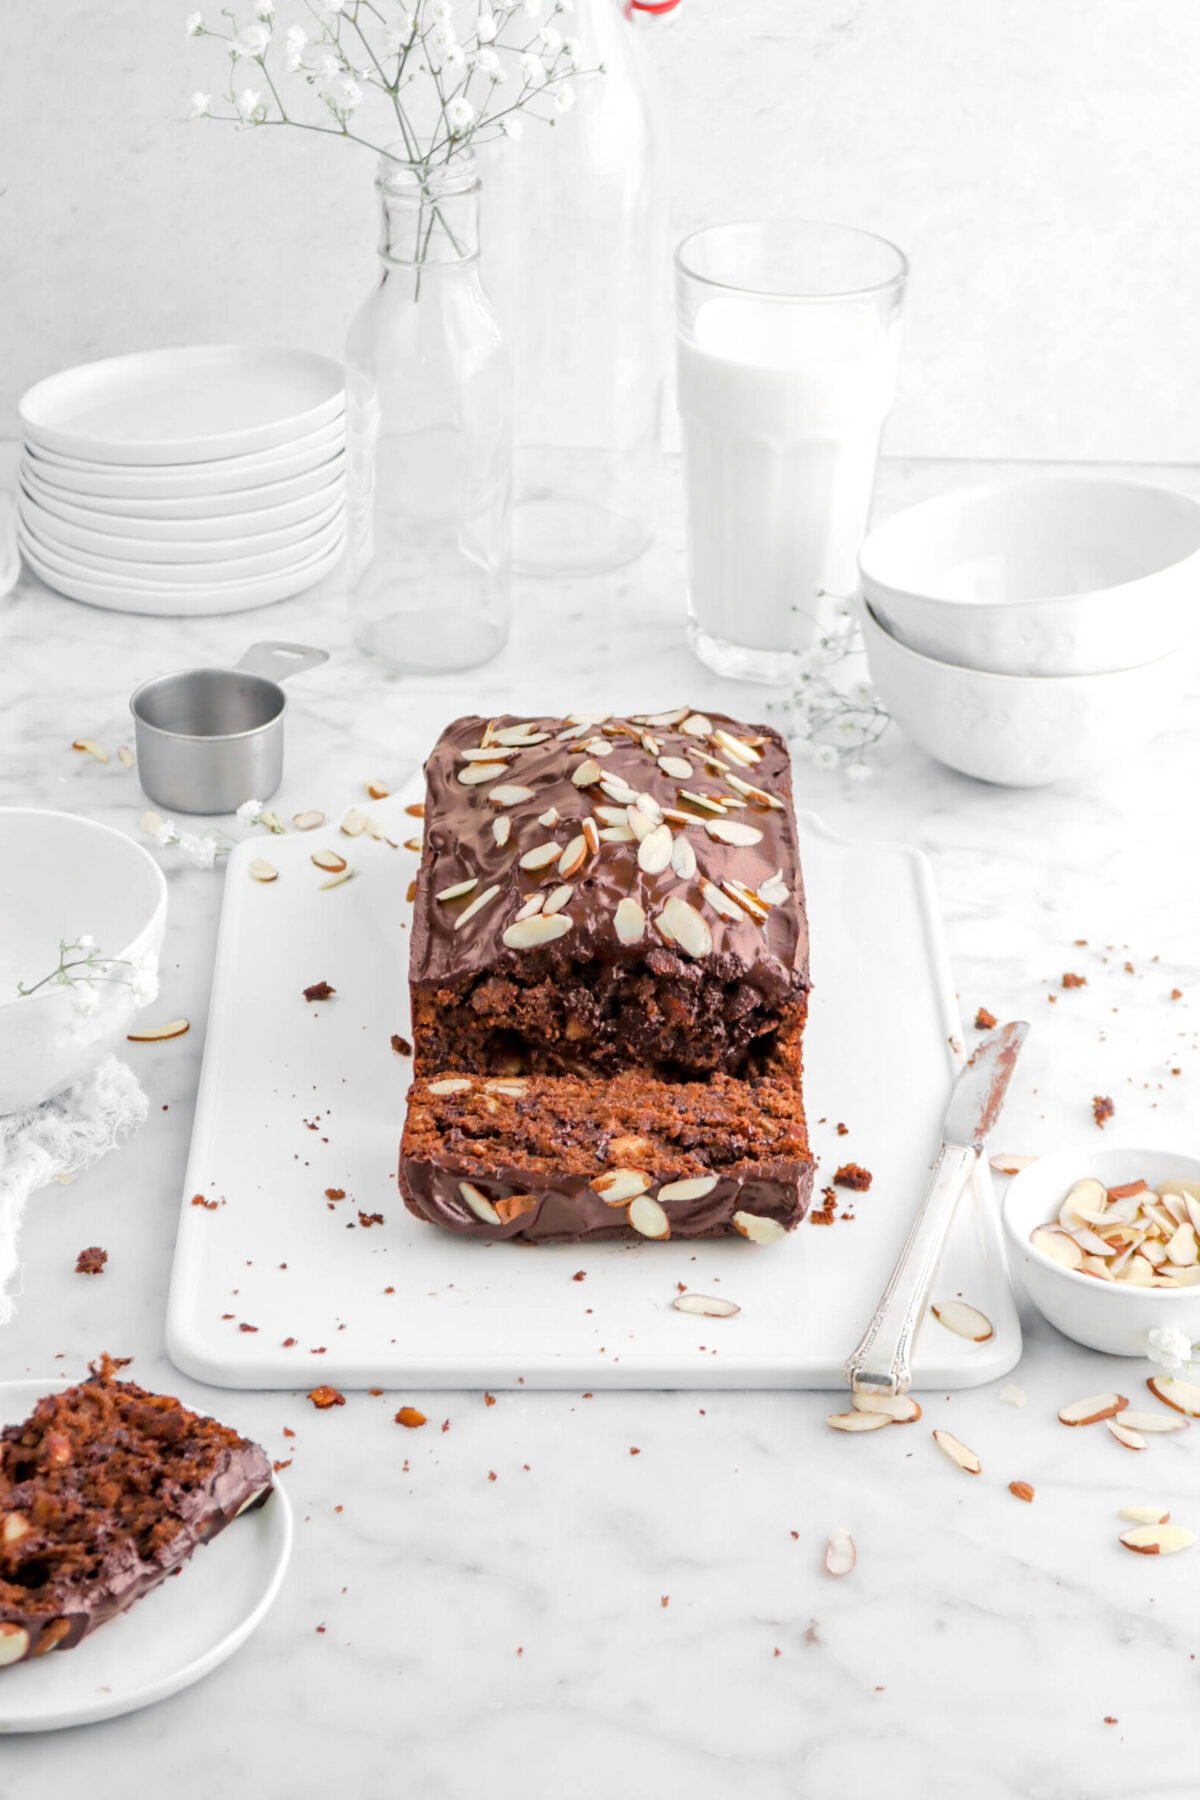 pulled back angled shot of chocolate loaf on white tray with slice laying on front, plate with slice beisde, bowl of sliced almonds beside, glass of milk and stack of plates behind